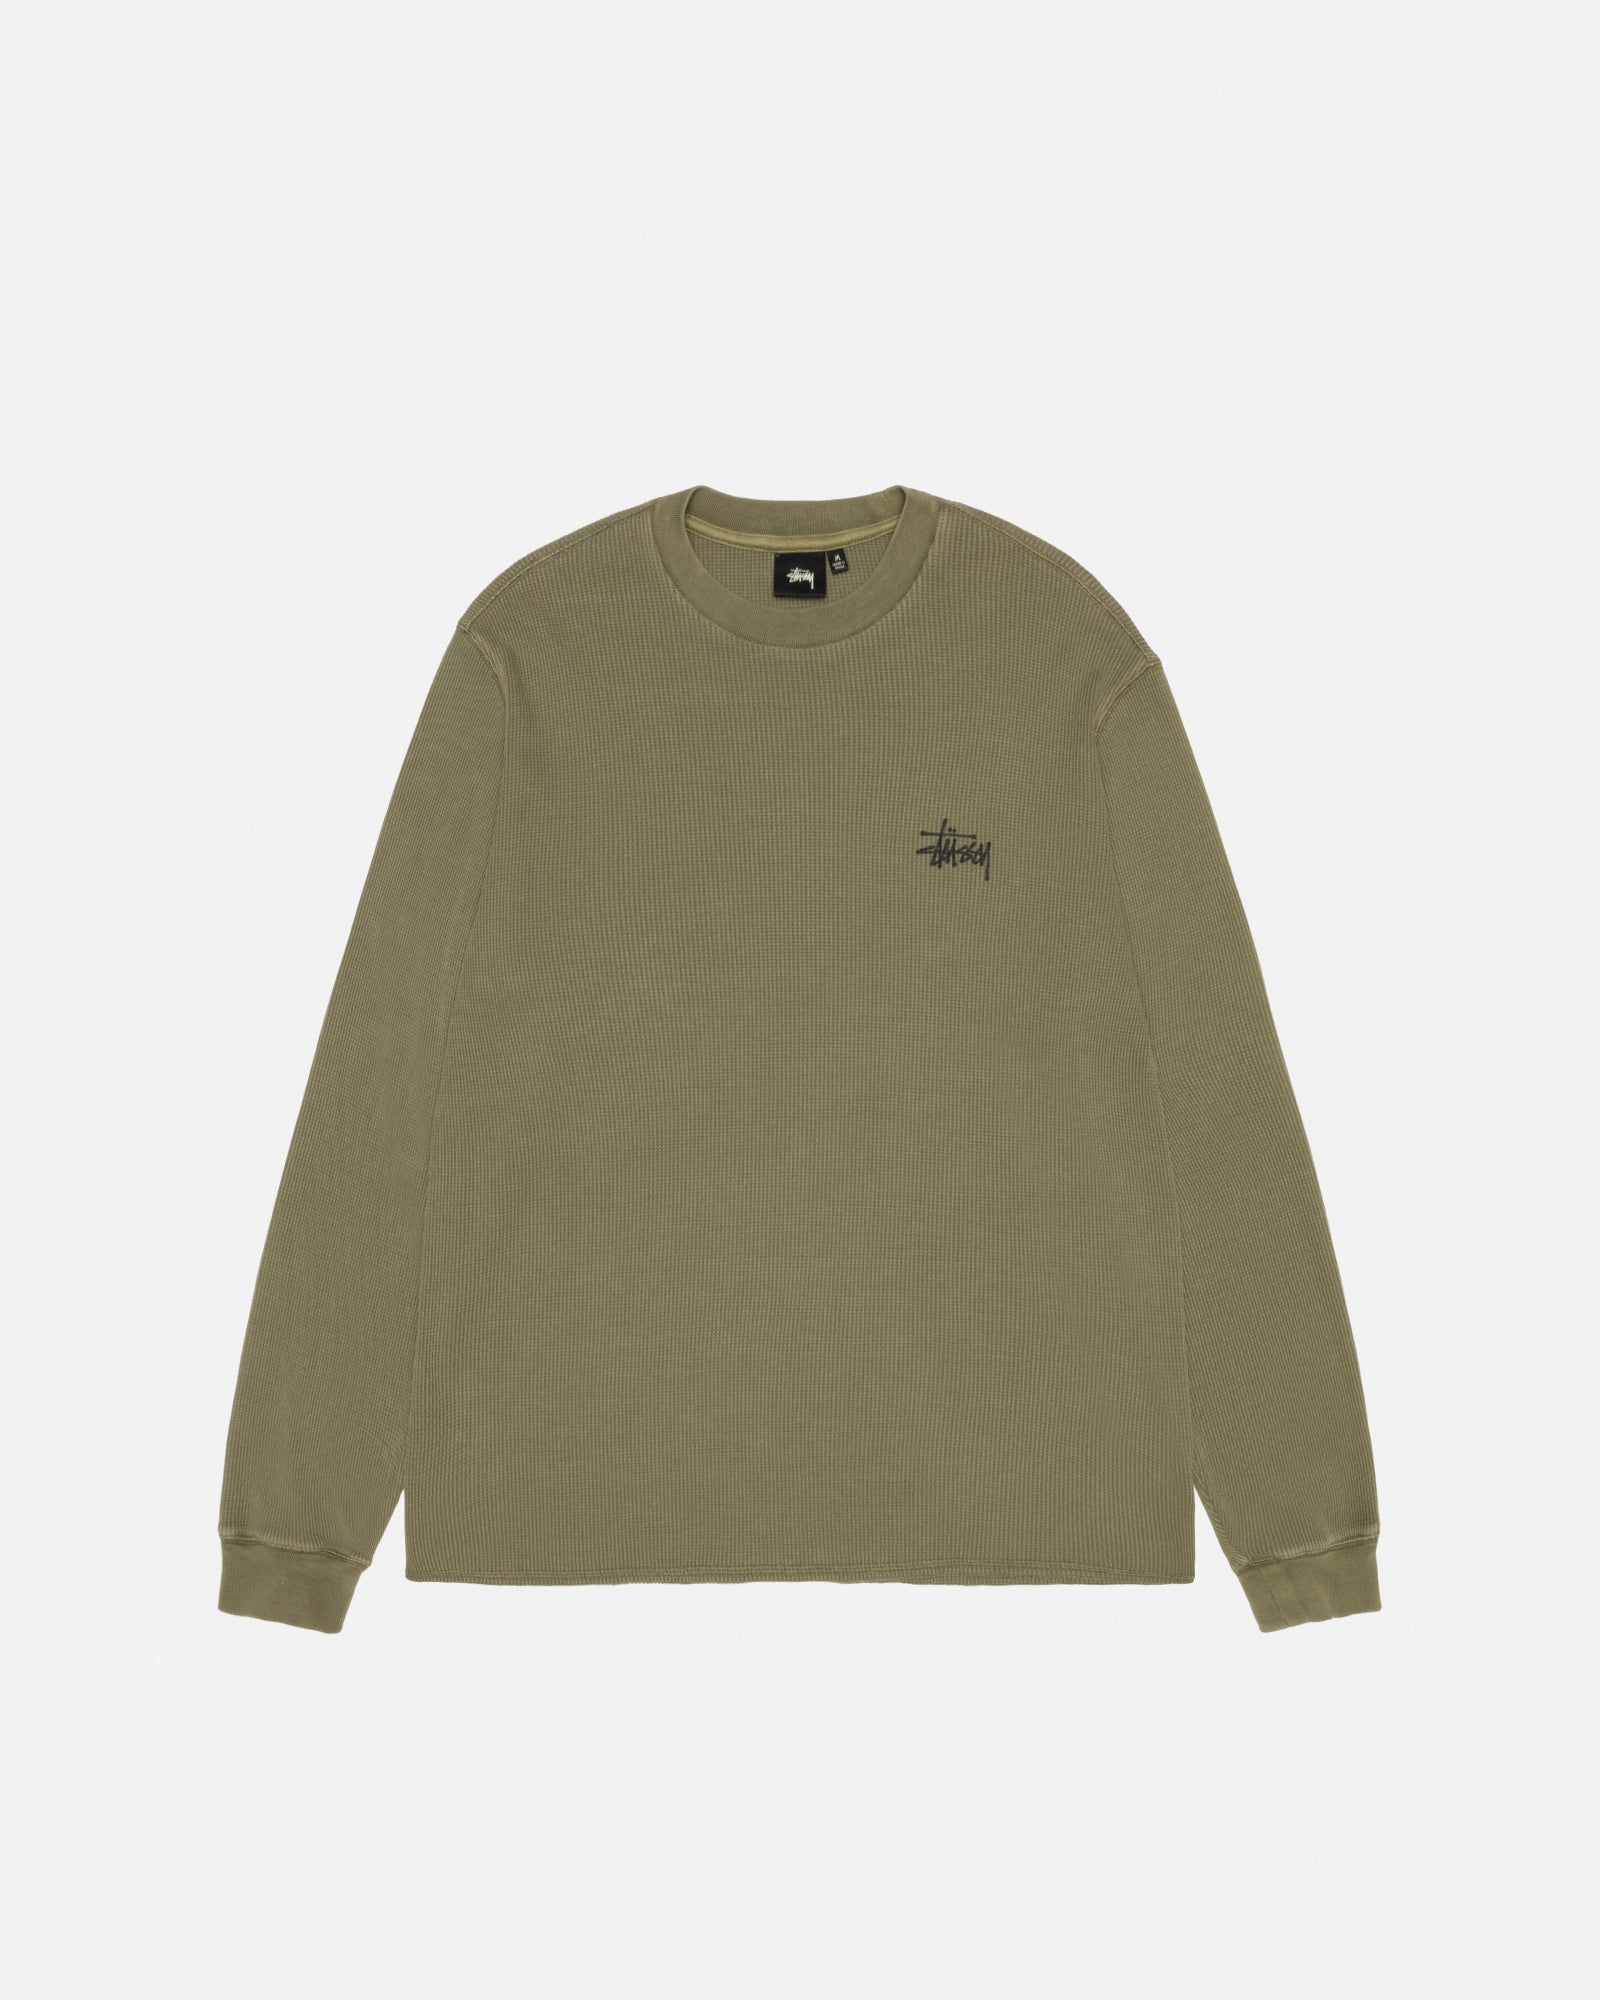 BASIC STOCK LS THERMAL OLIVE TOP